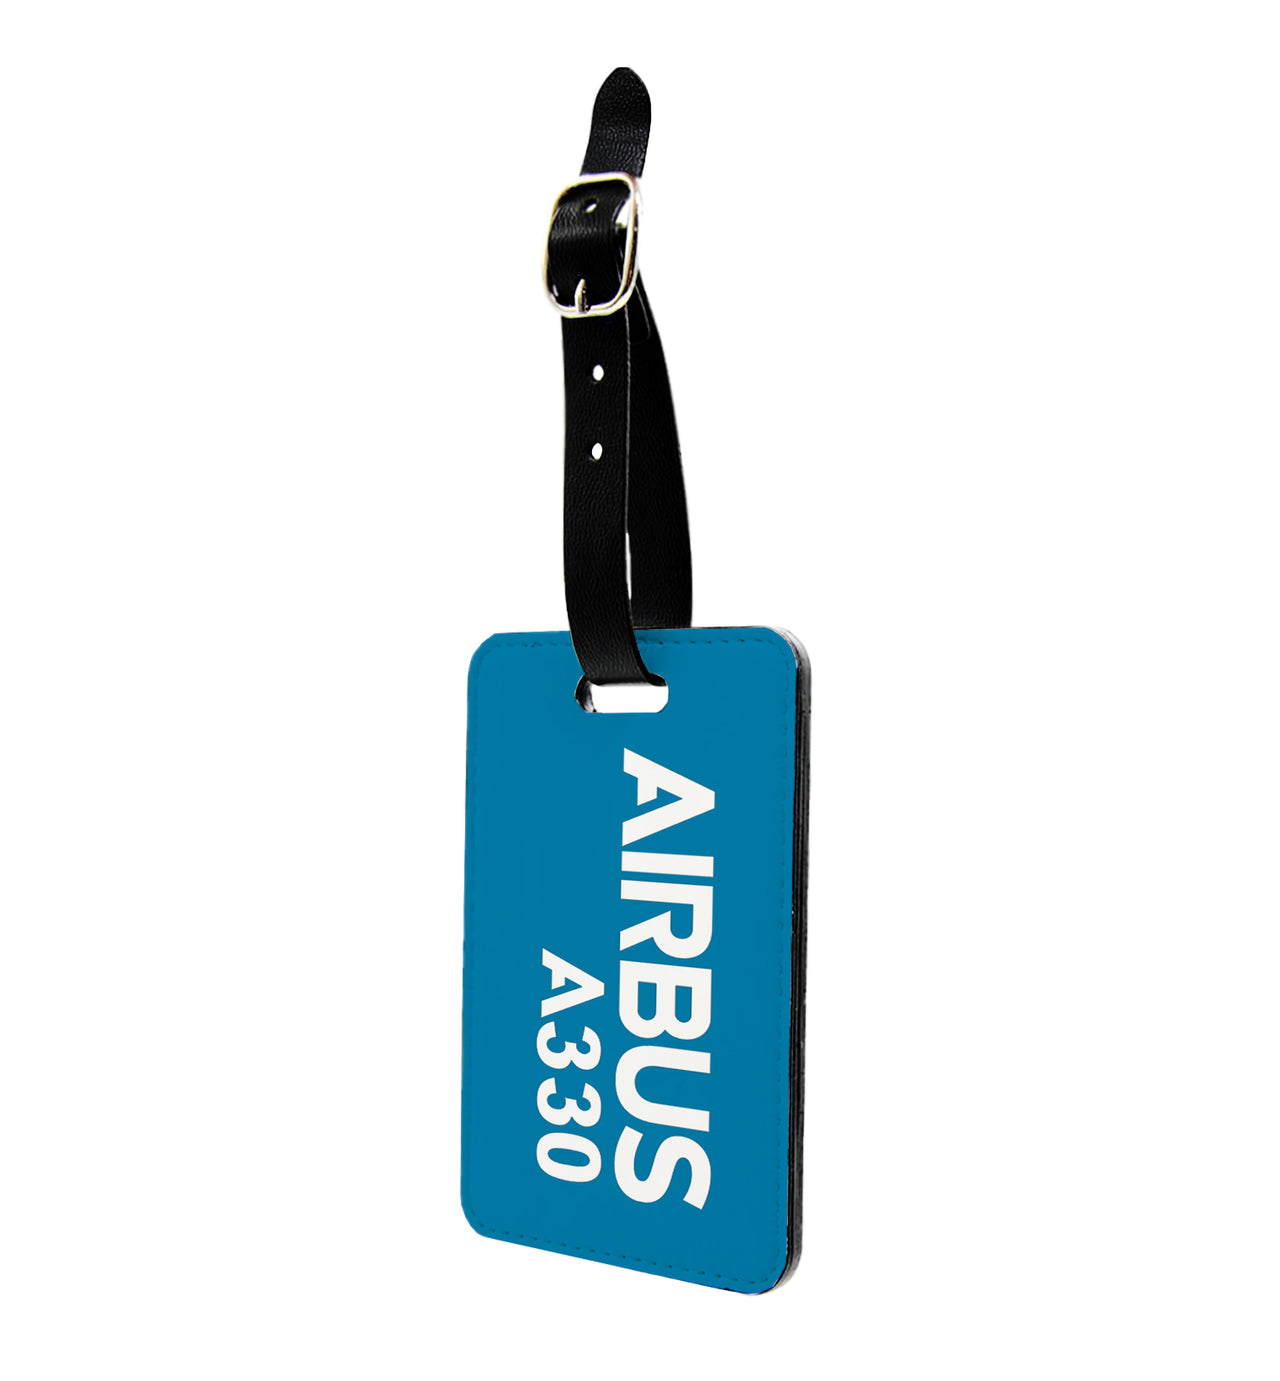 Airbus A330 & Text Designed Luggage Tag